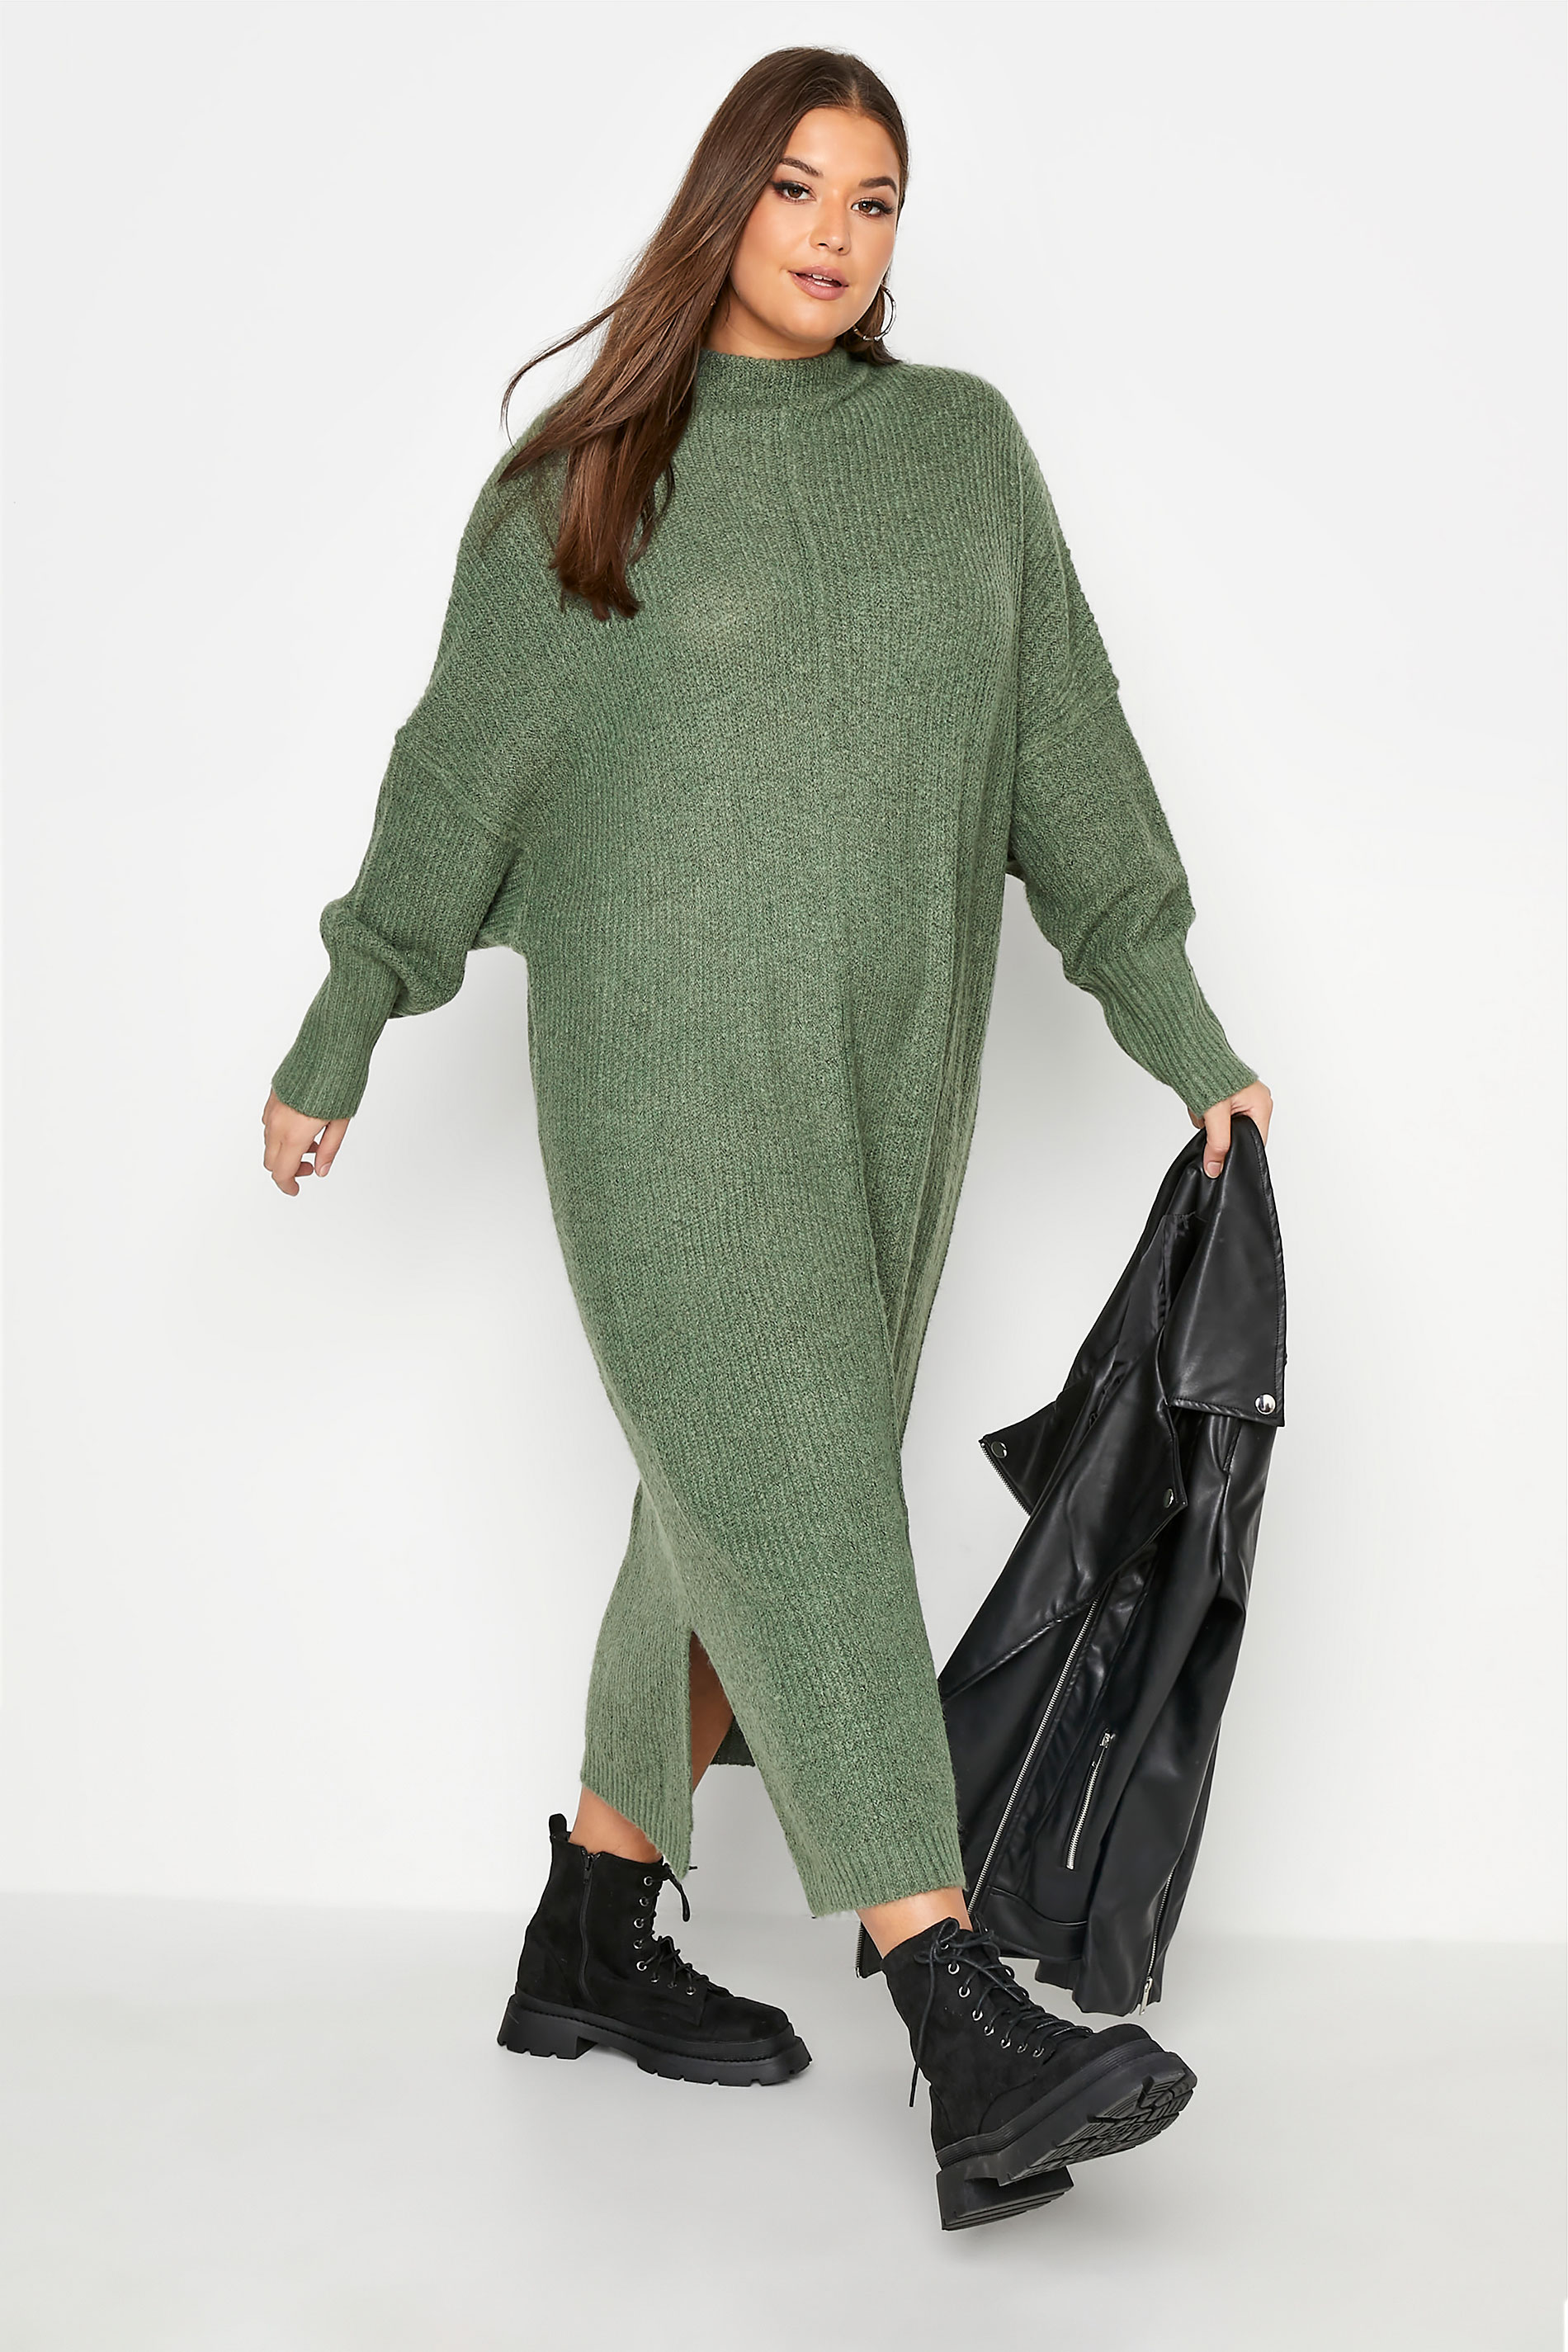 Plus Size Sage Green Knitted Jumper Dress | Yours Clothing 2